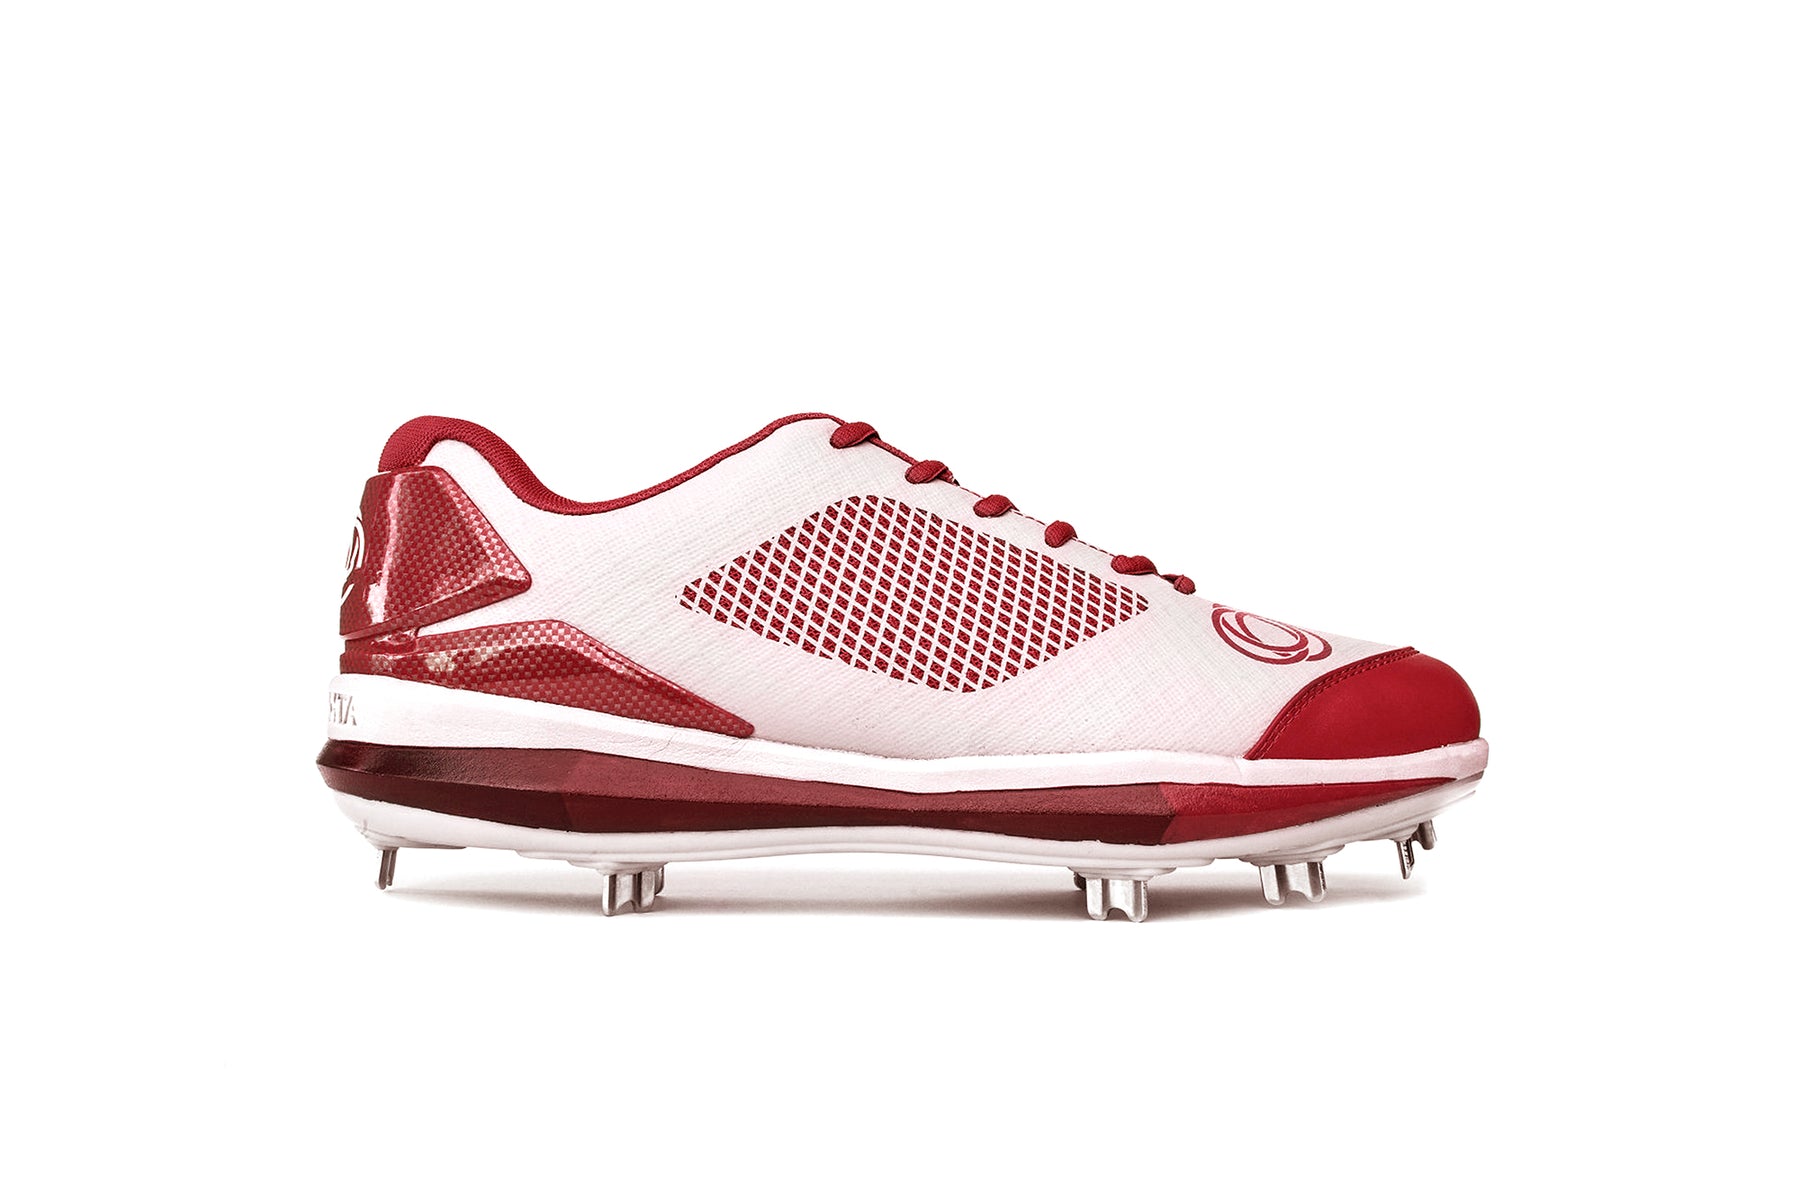 red baseball metal cleats